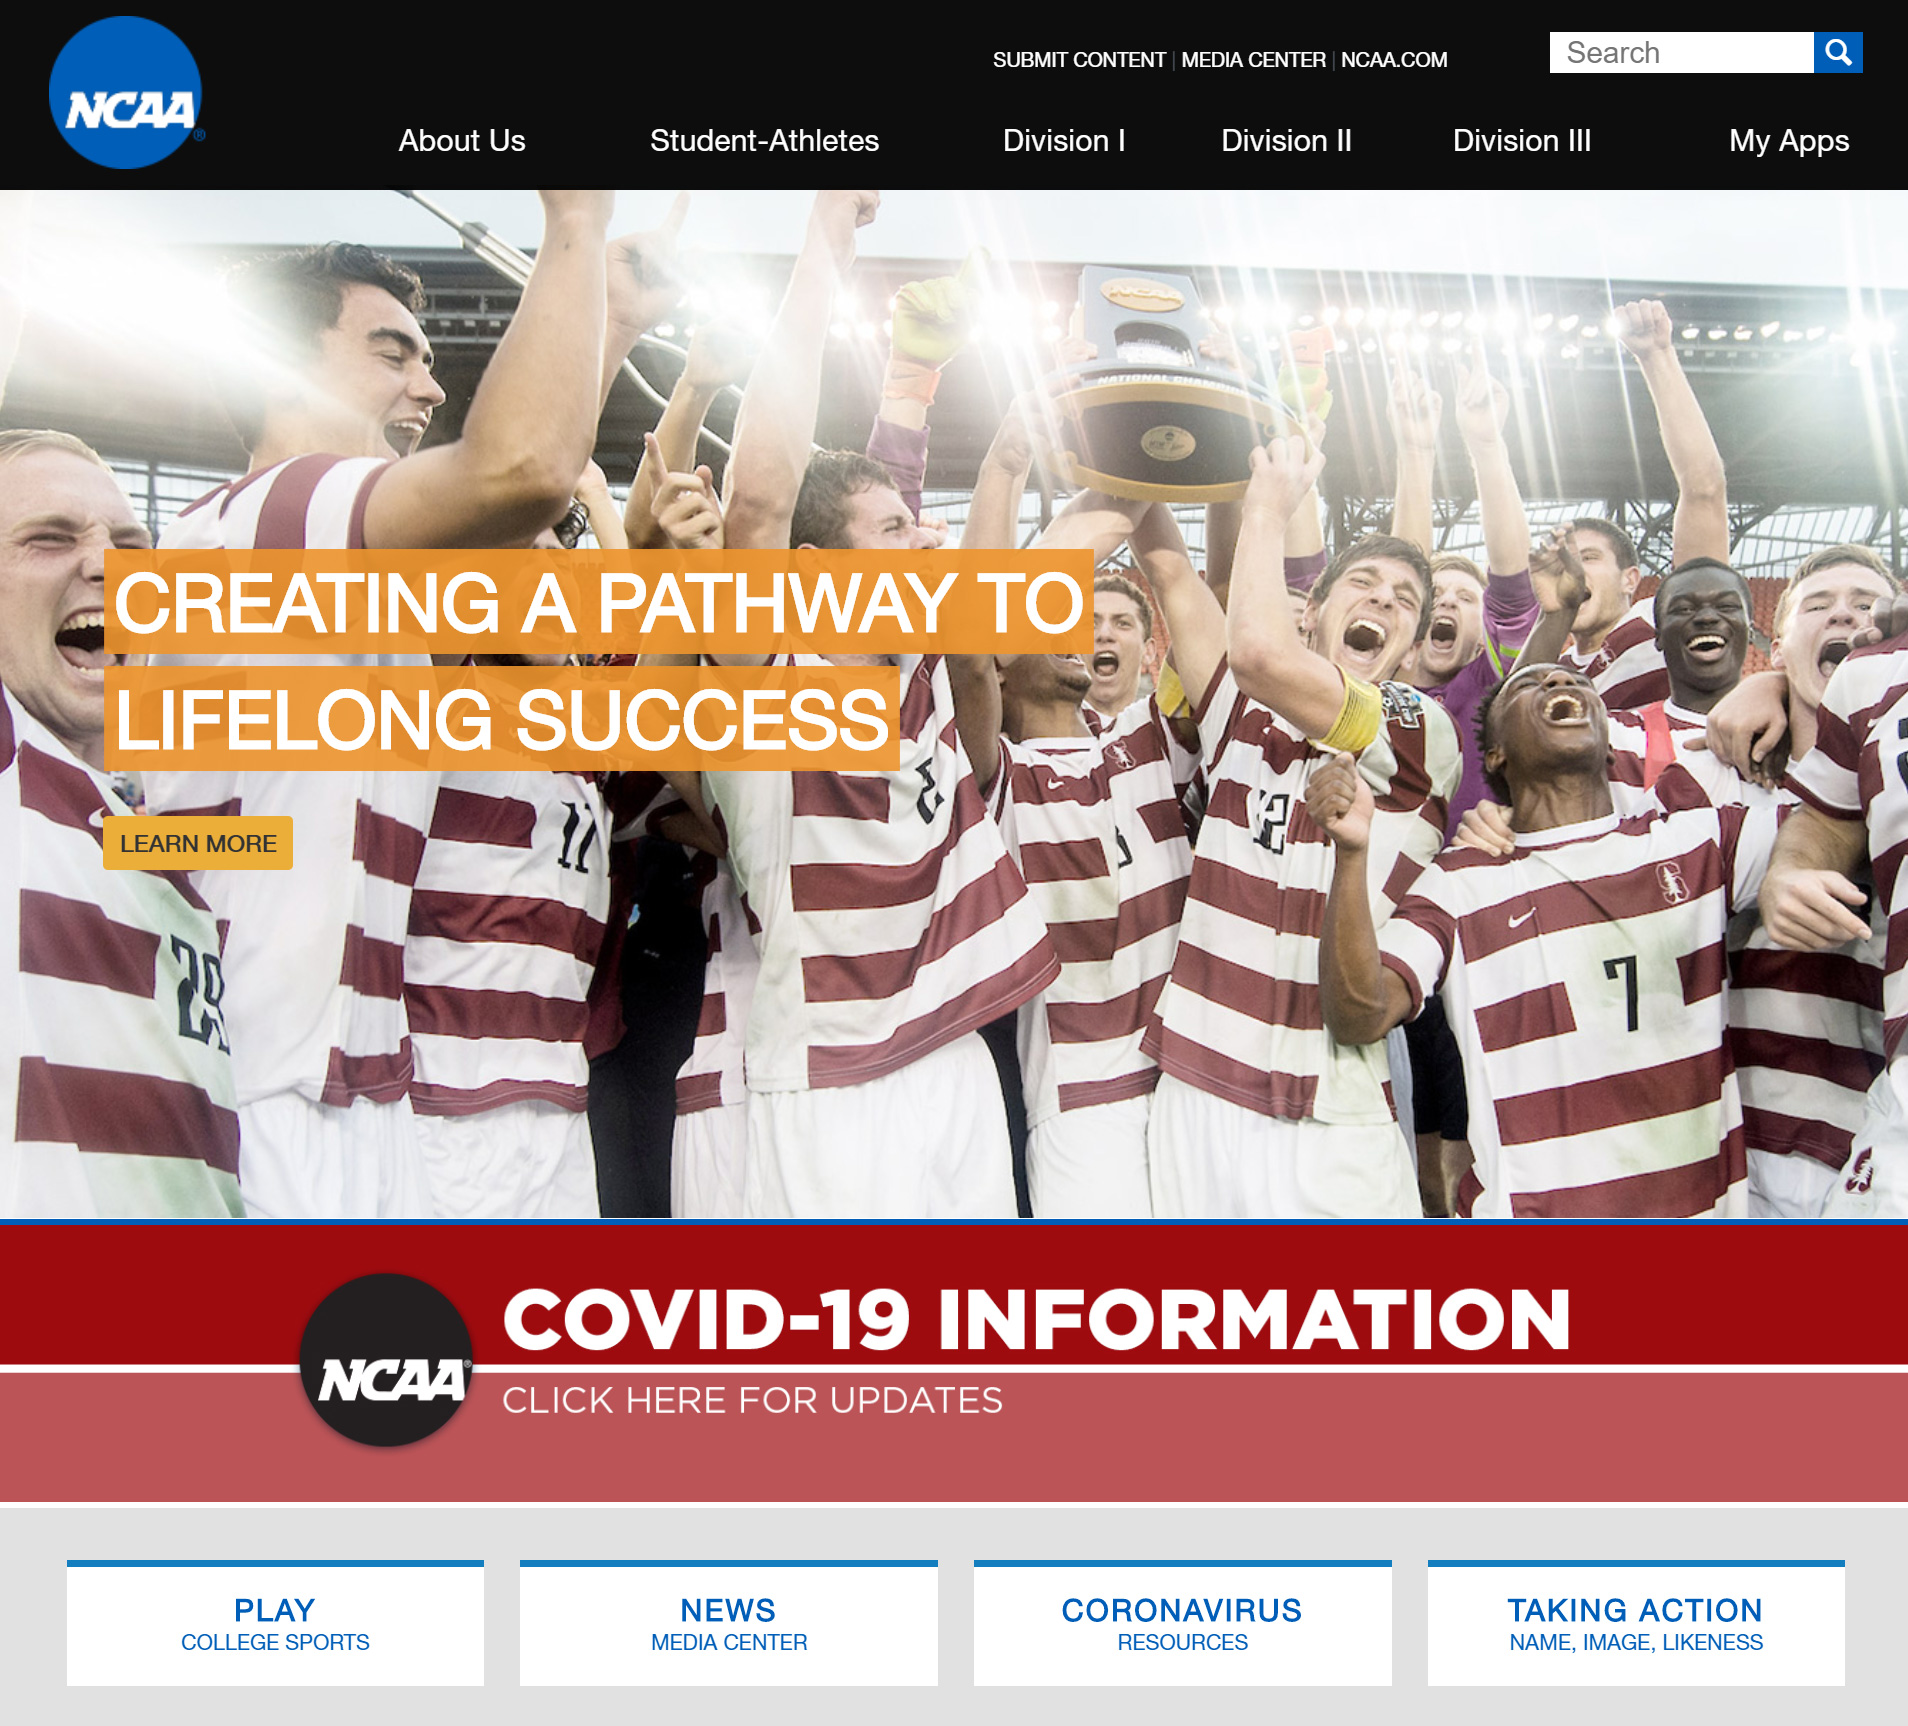 The entire alert banner on the NCAA website is contained in an image, including all of the text, and will not be visible at all if the file fails to load.